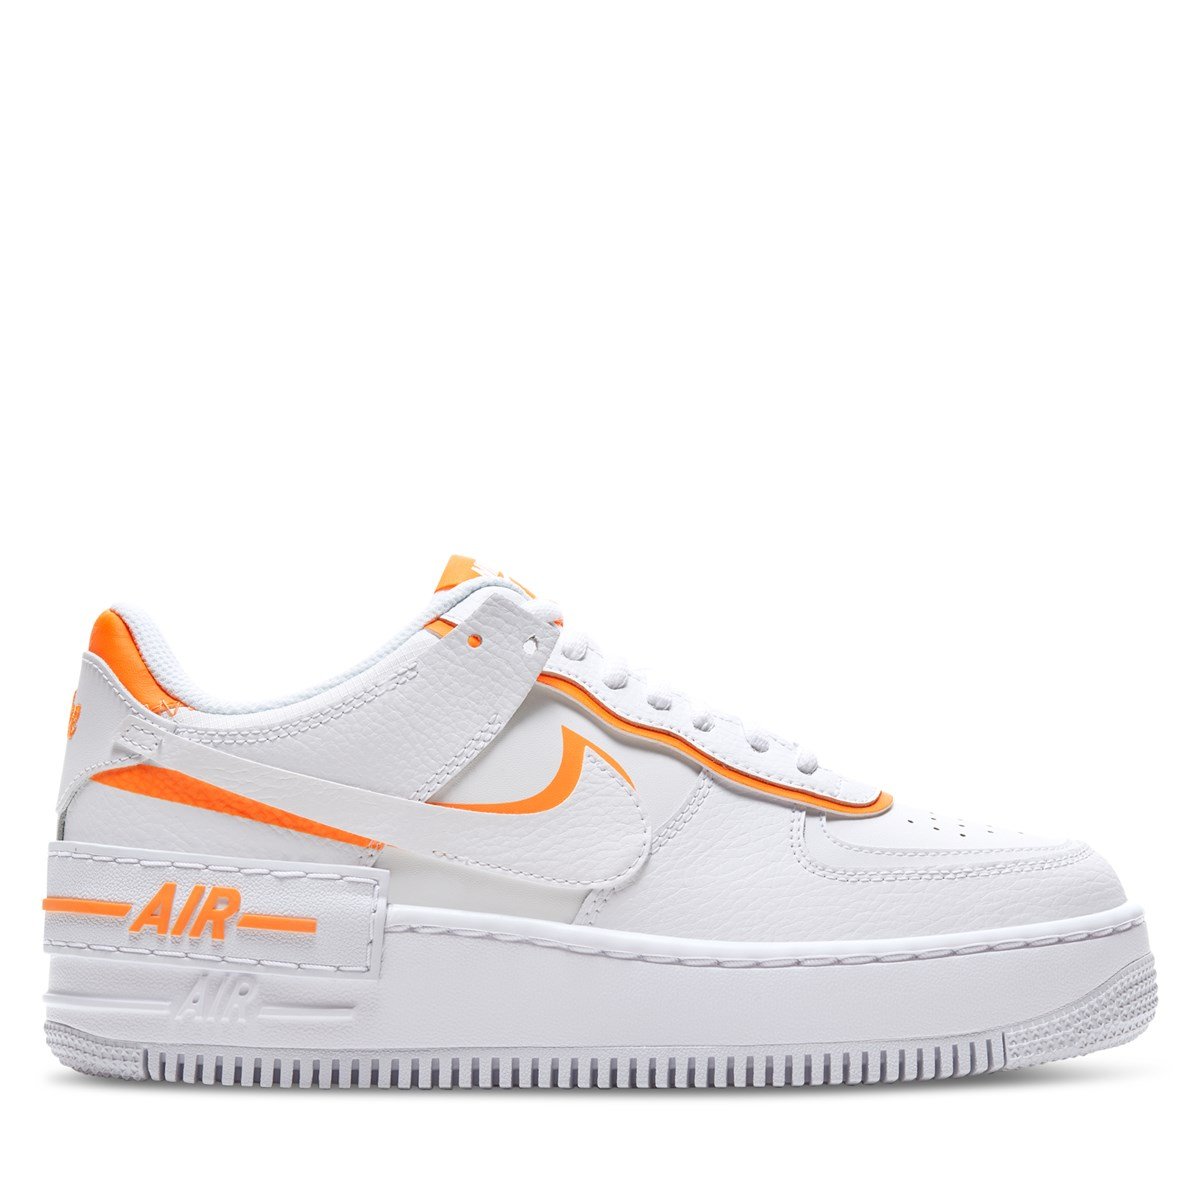 Baskets Air Force 1 Shadow blanches pour femmes